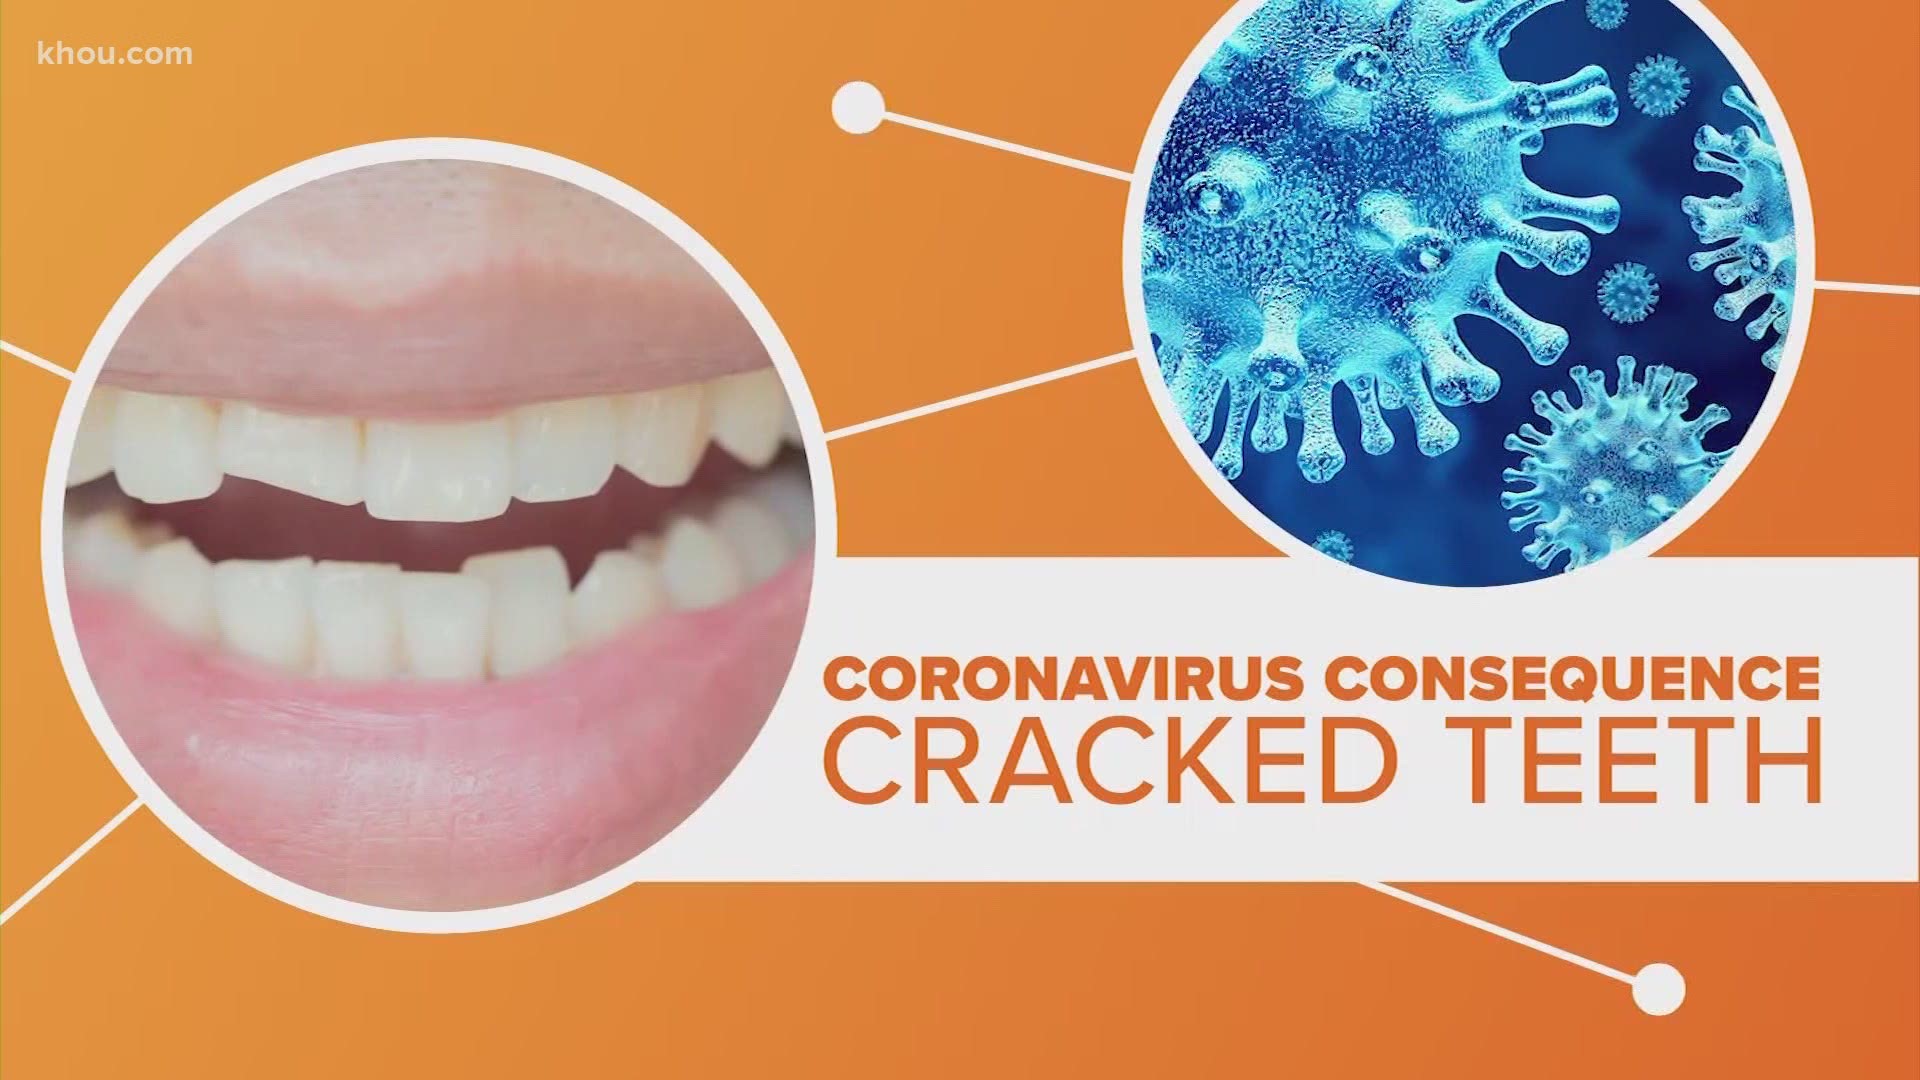 We are seeing some strange consequences from the coronavirus pandemic and that apparently includes more cracked teeth. Let's connect the dots.